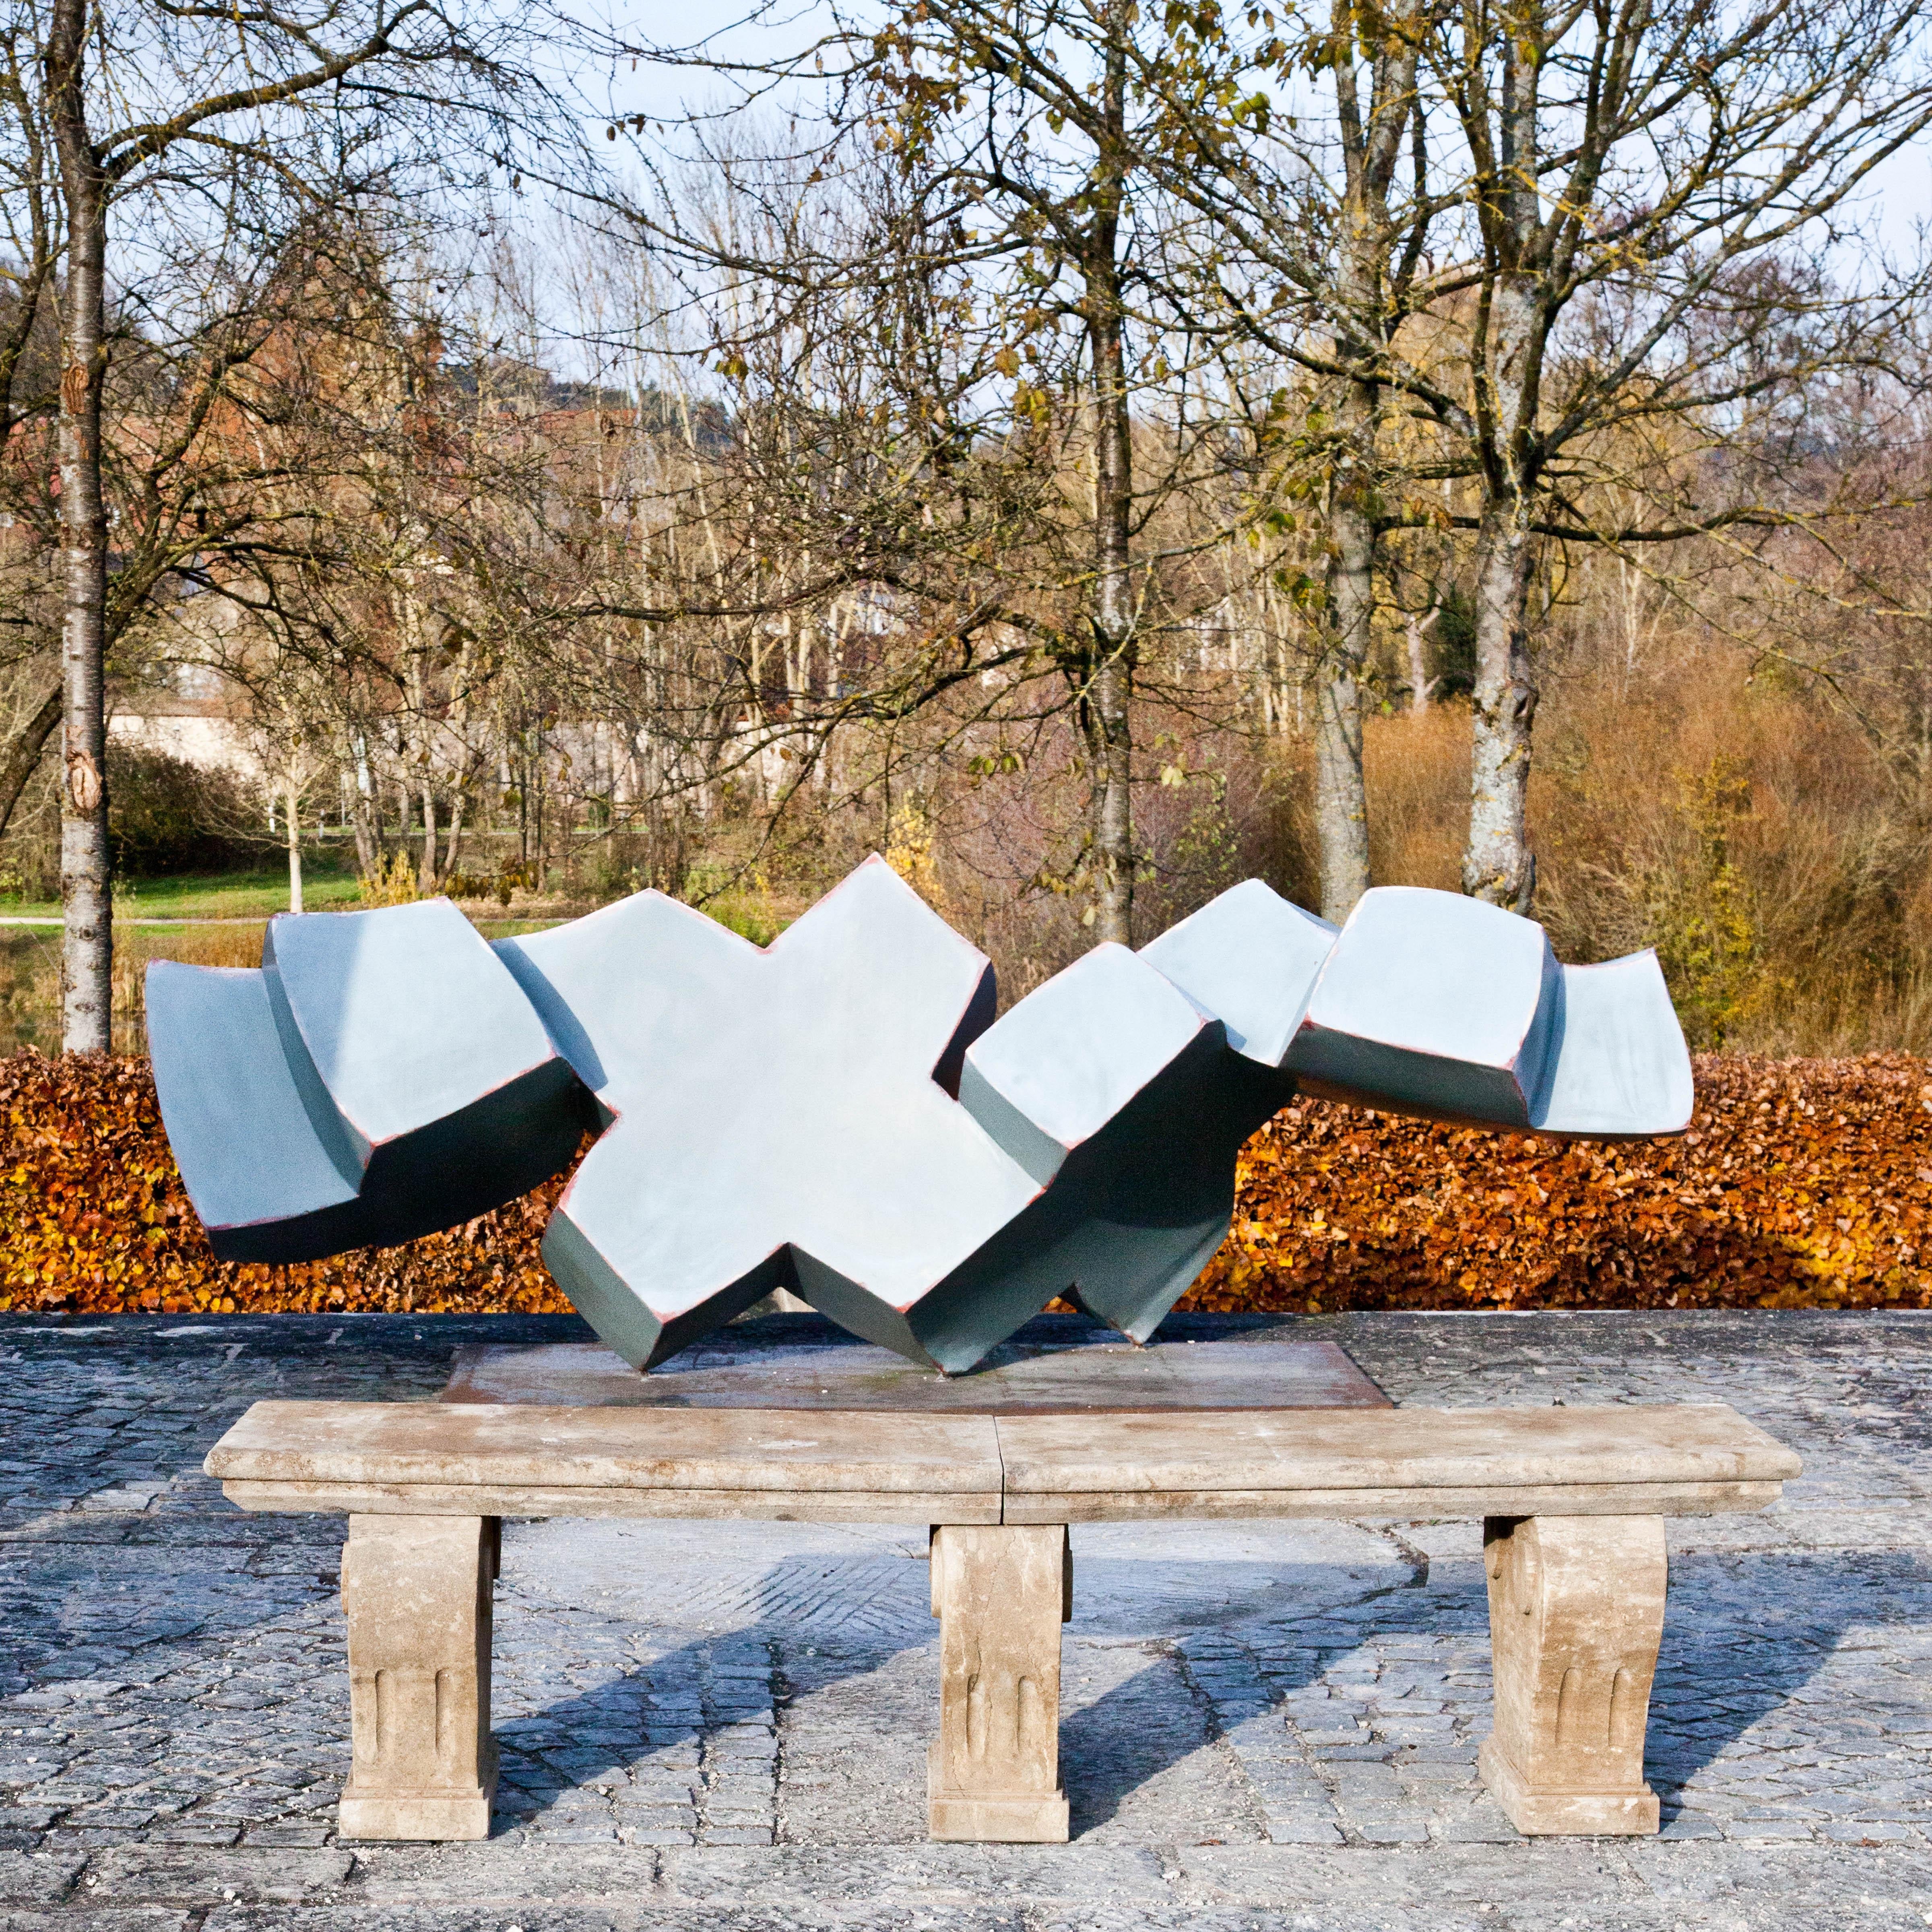 XXXX, Jörg Bach, 2006, Lacquer and Steel, Abstract Sculpture, Germany  For Sale 3